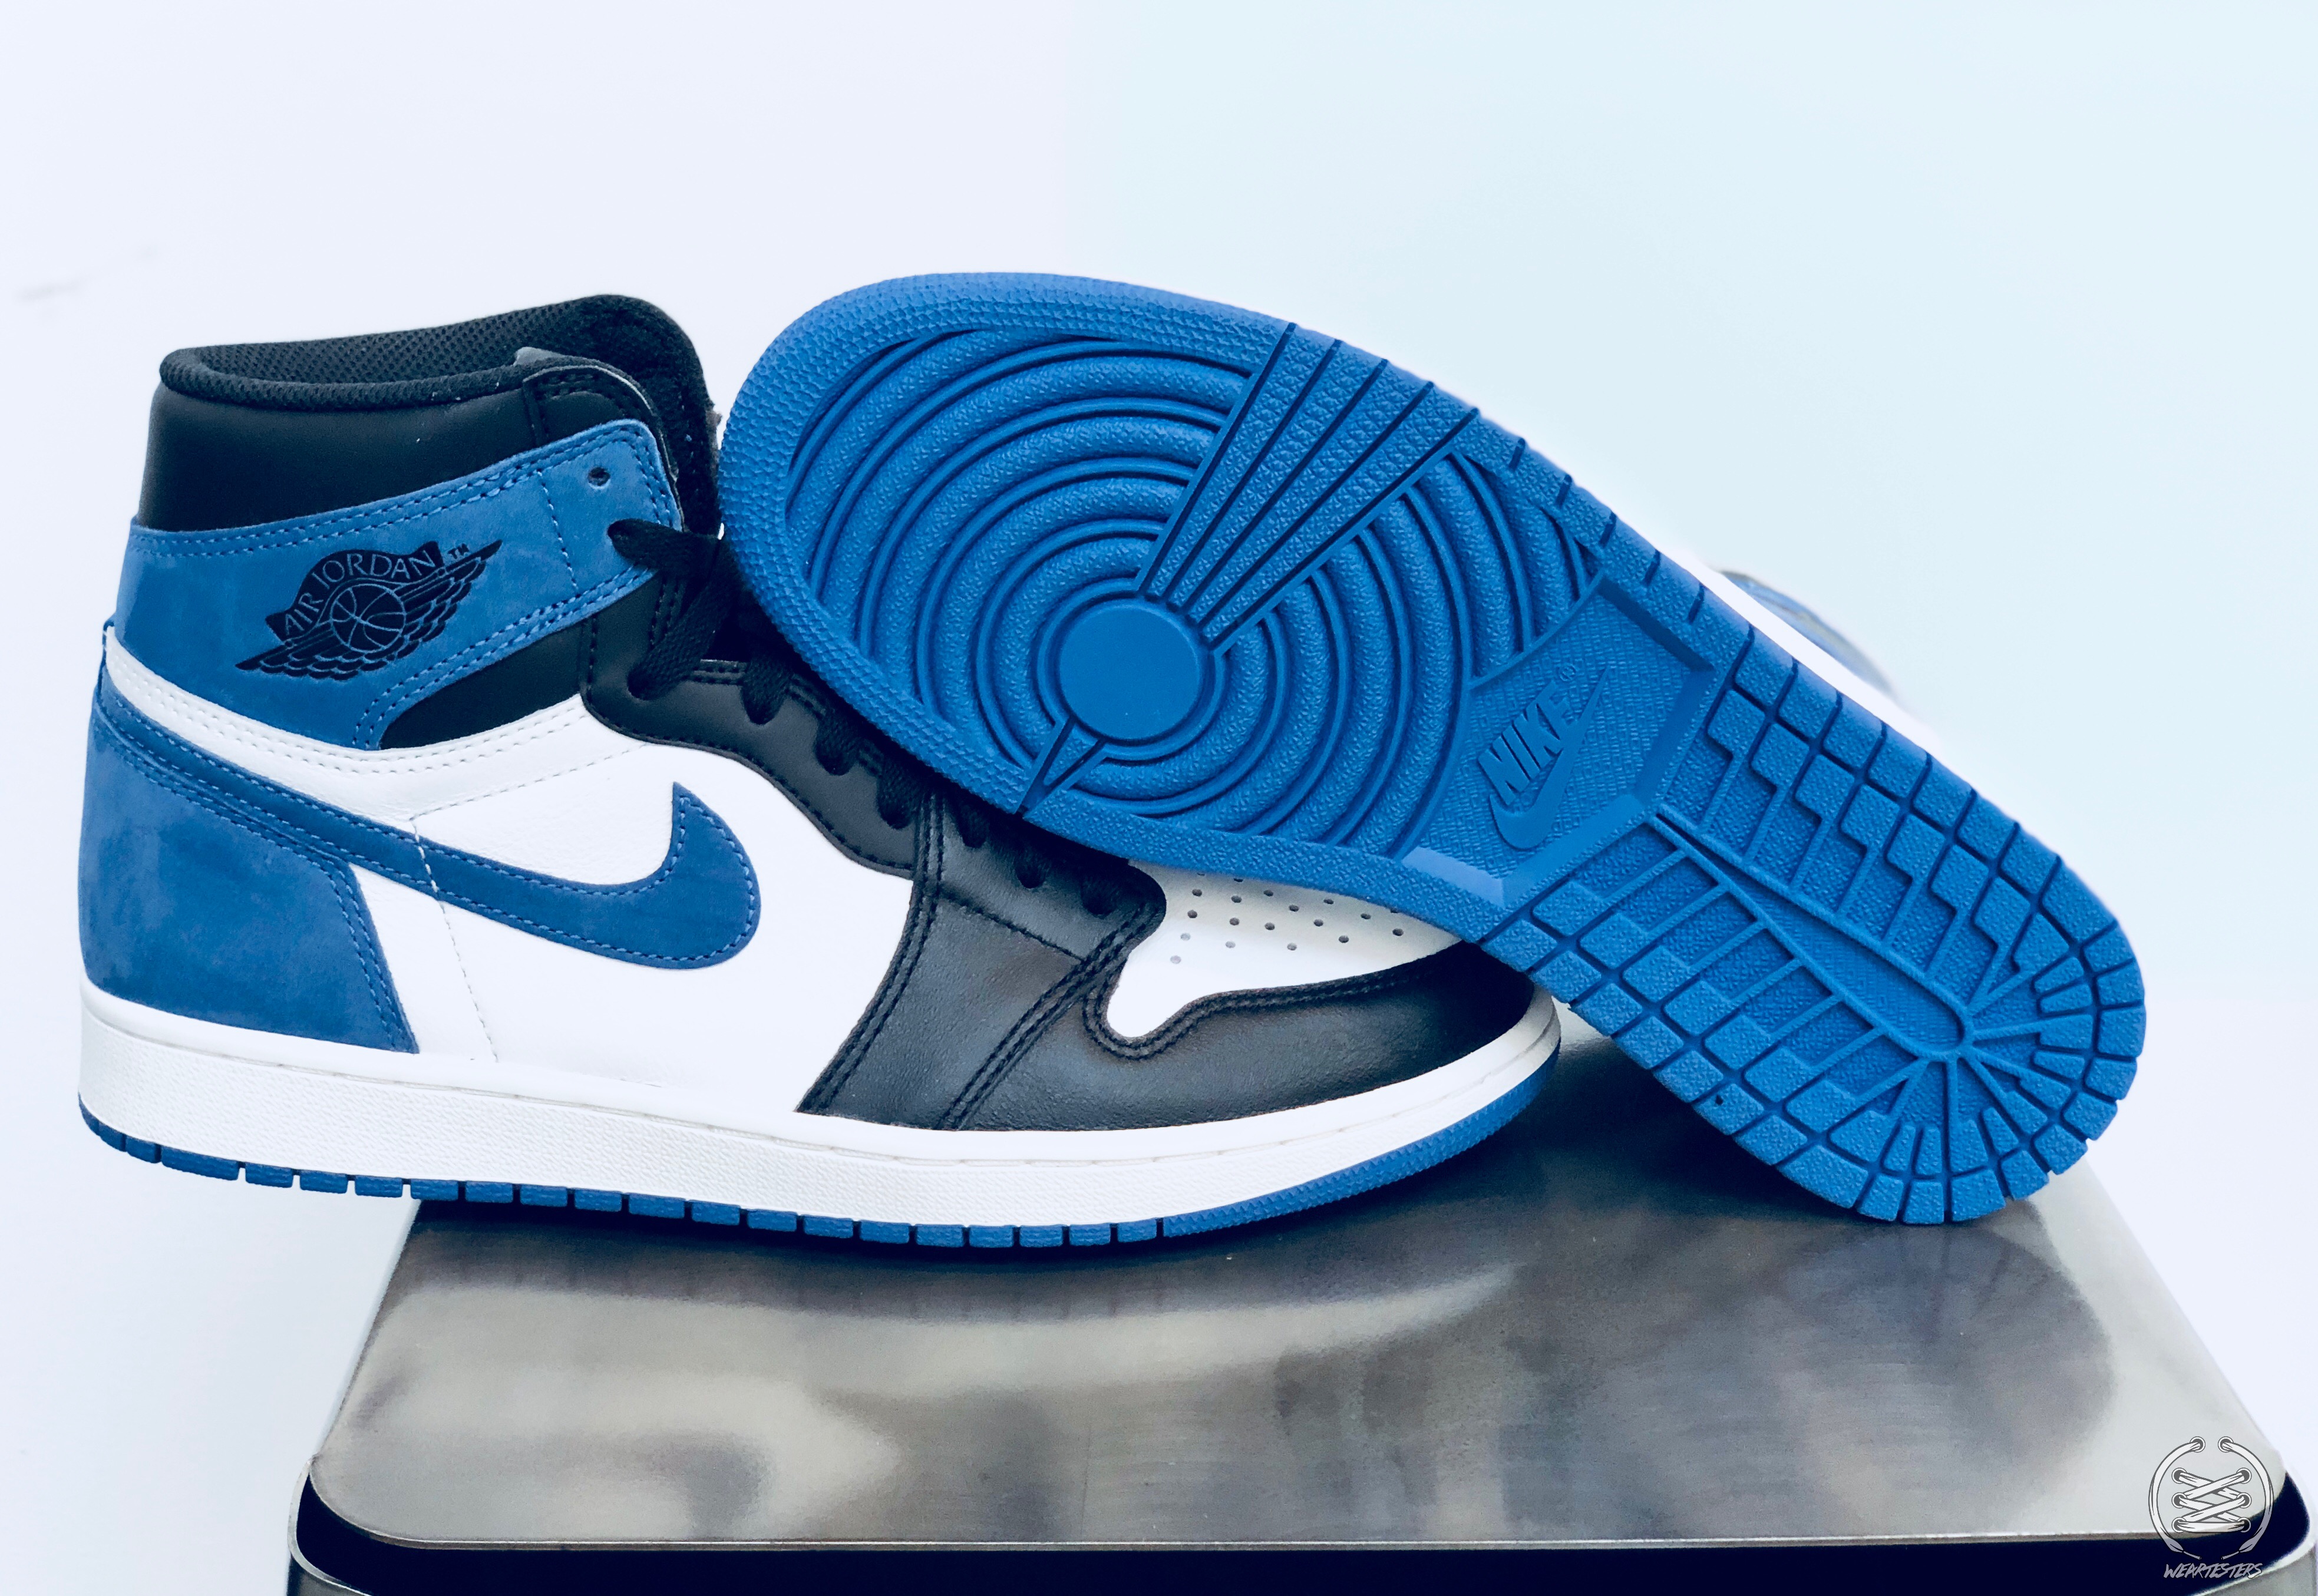 Air Jordan 1 Blue Moon Best Hand in the Game collection 2